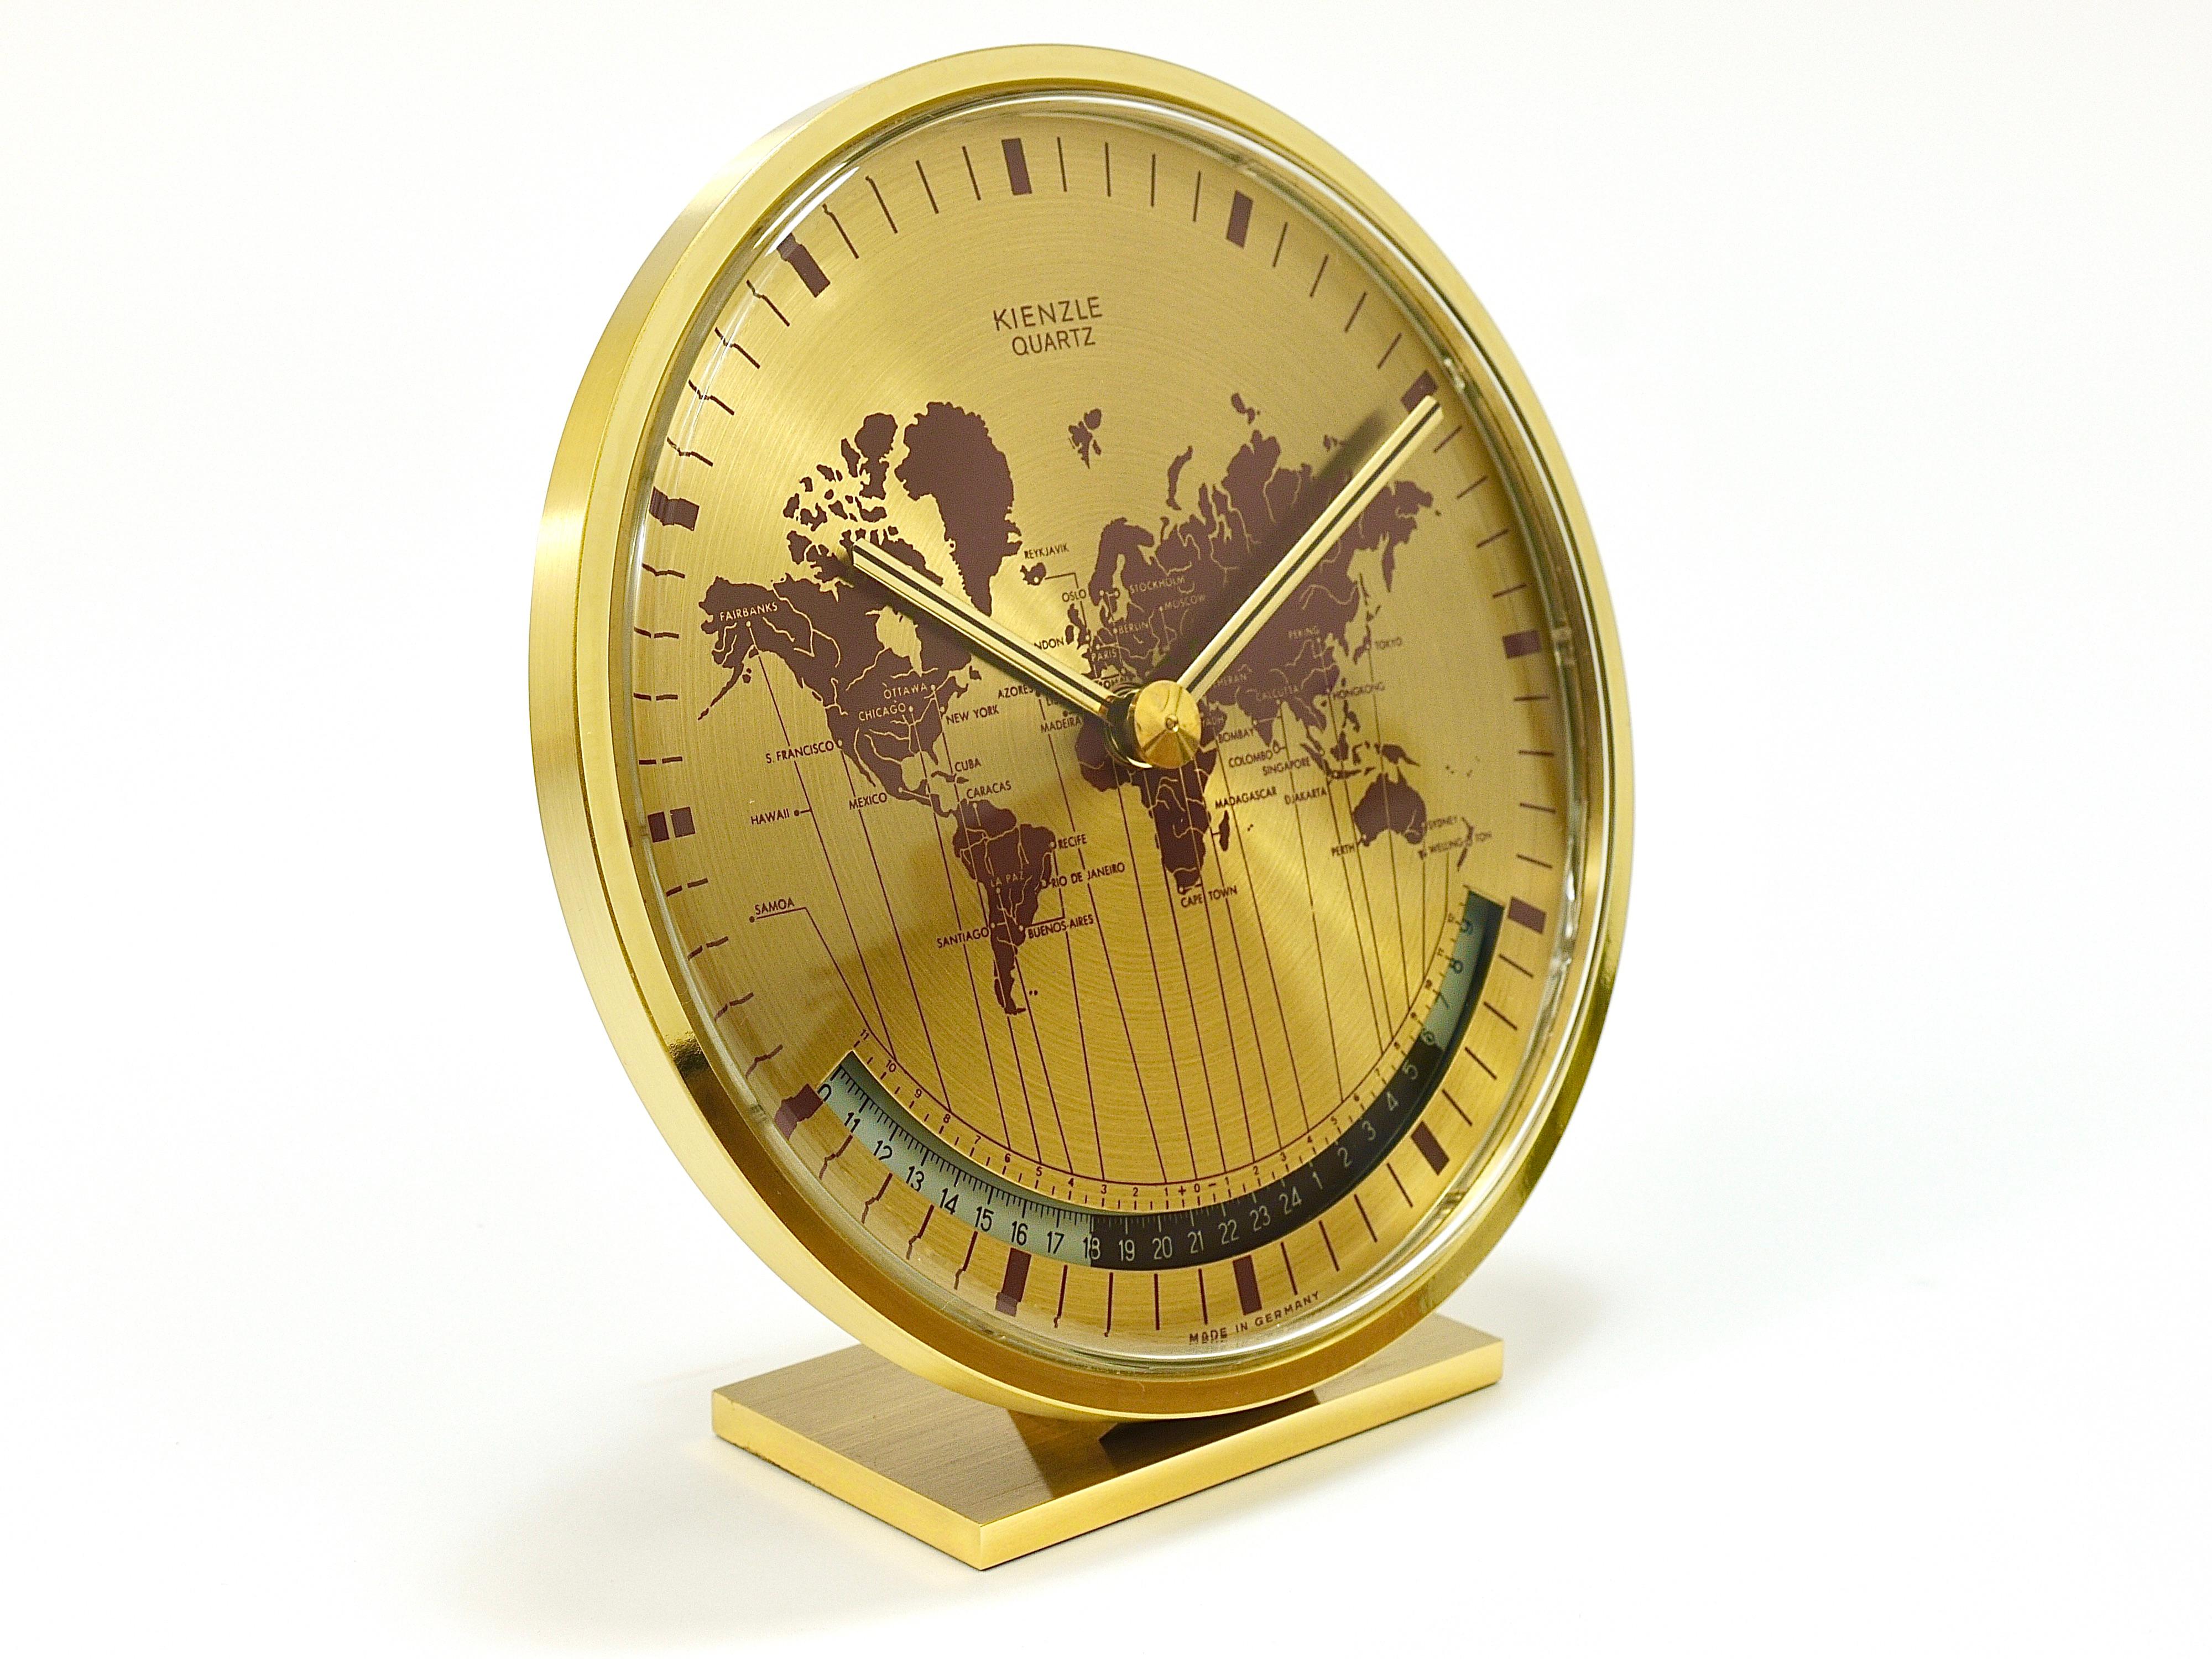 Kienzle GMT World Time Zone Brass Table Clock, Midcentury, Germany, 1960s For Sale 2